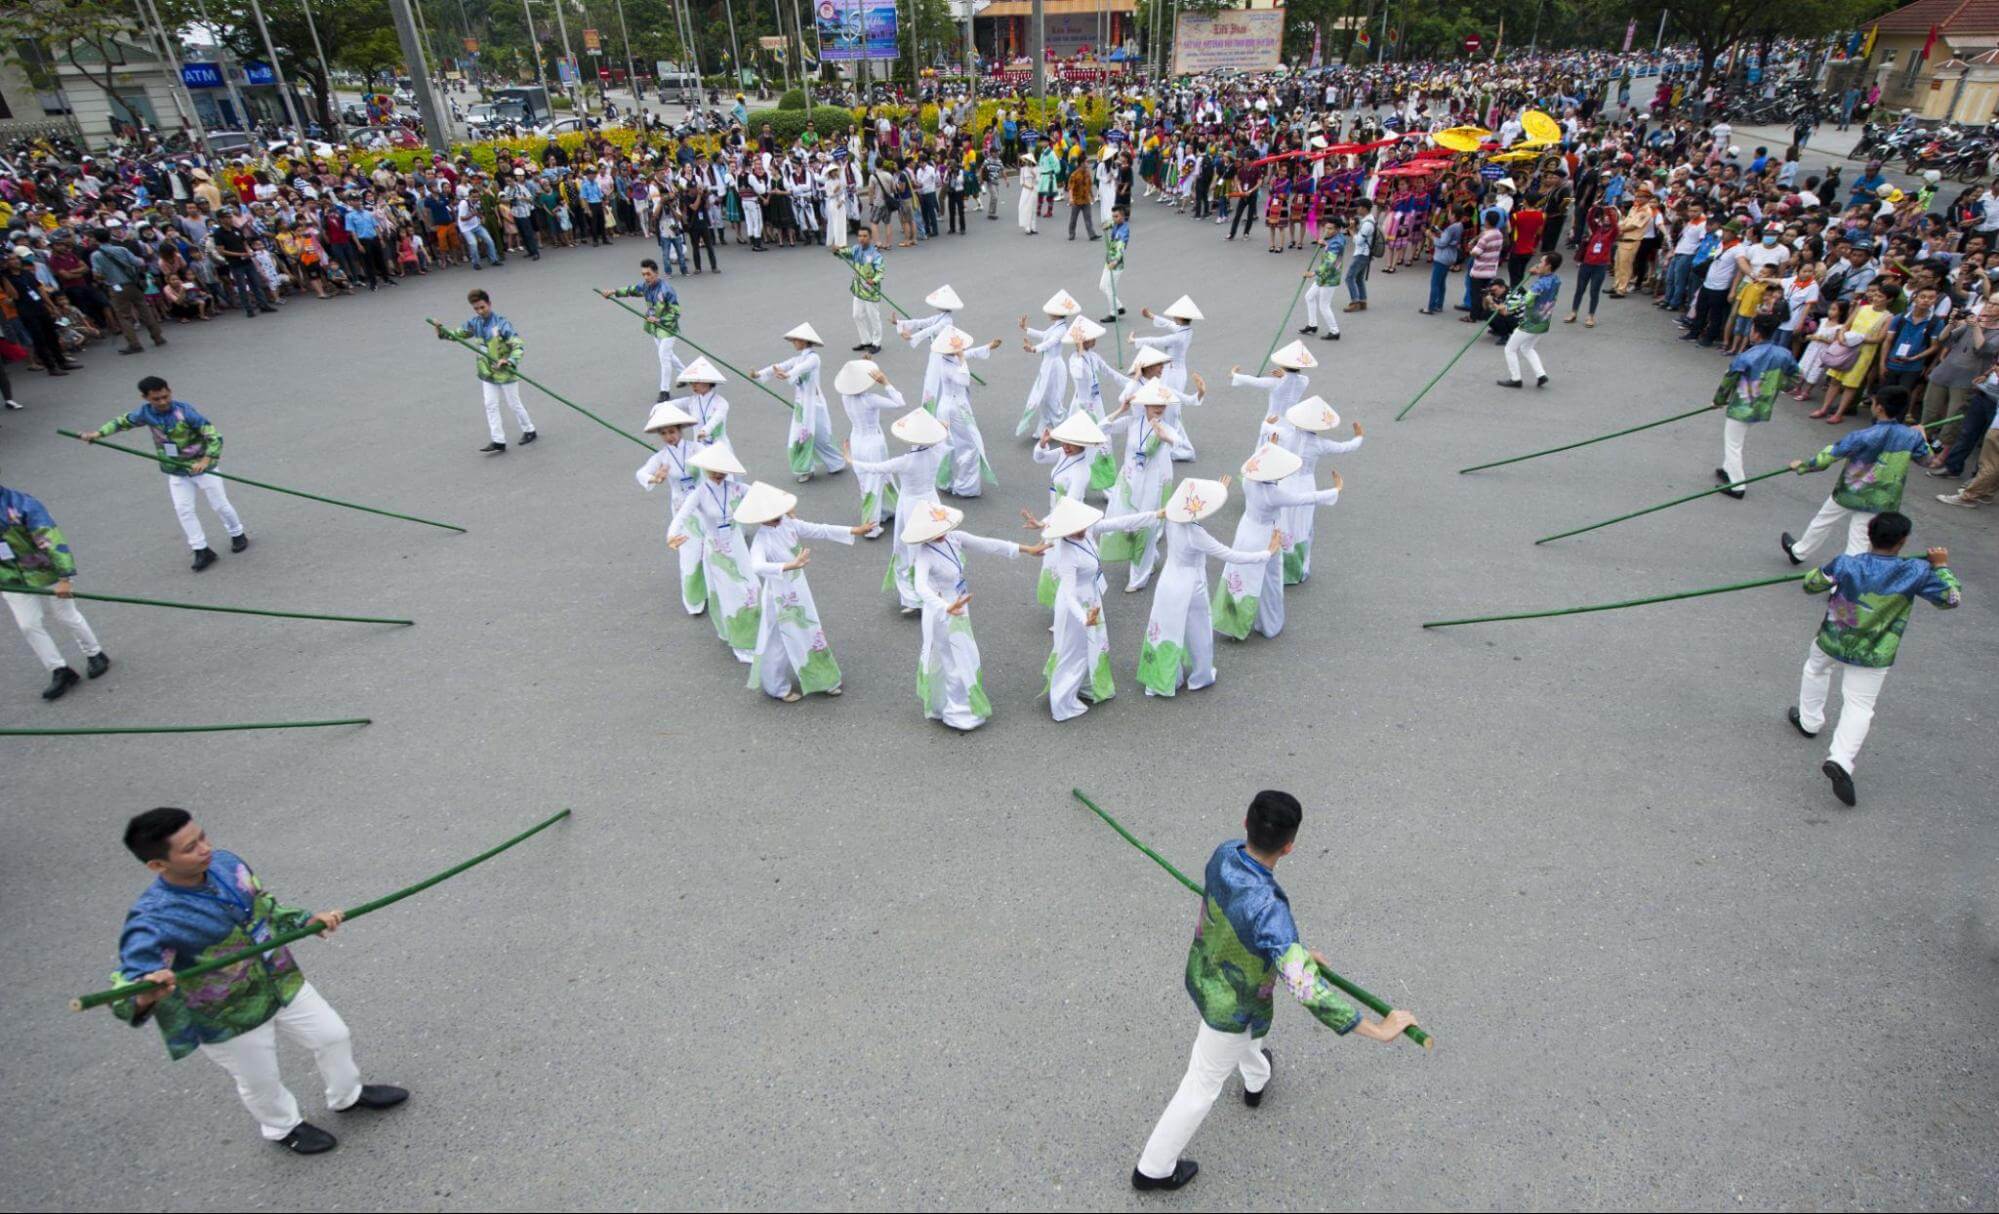 Hue Festival (Hue Vietnam) with a wide range of activities